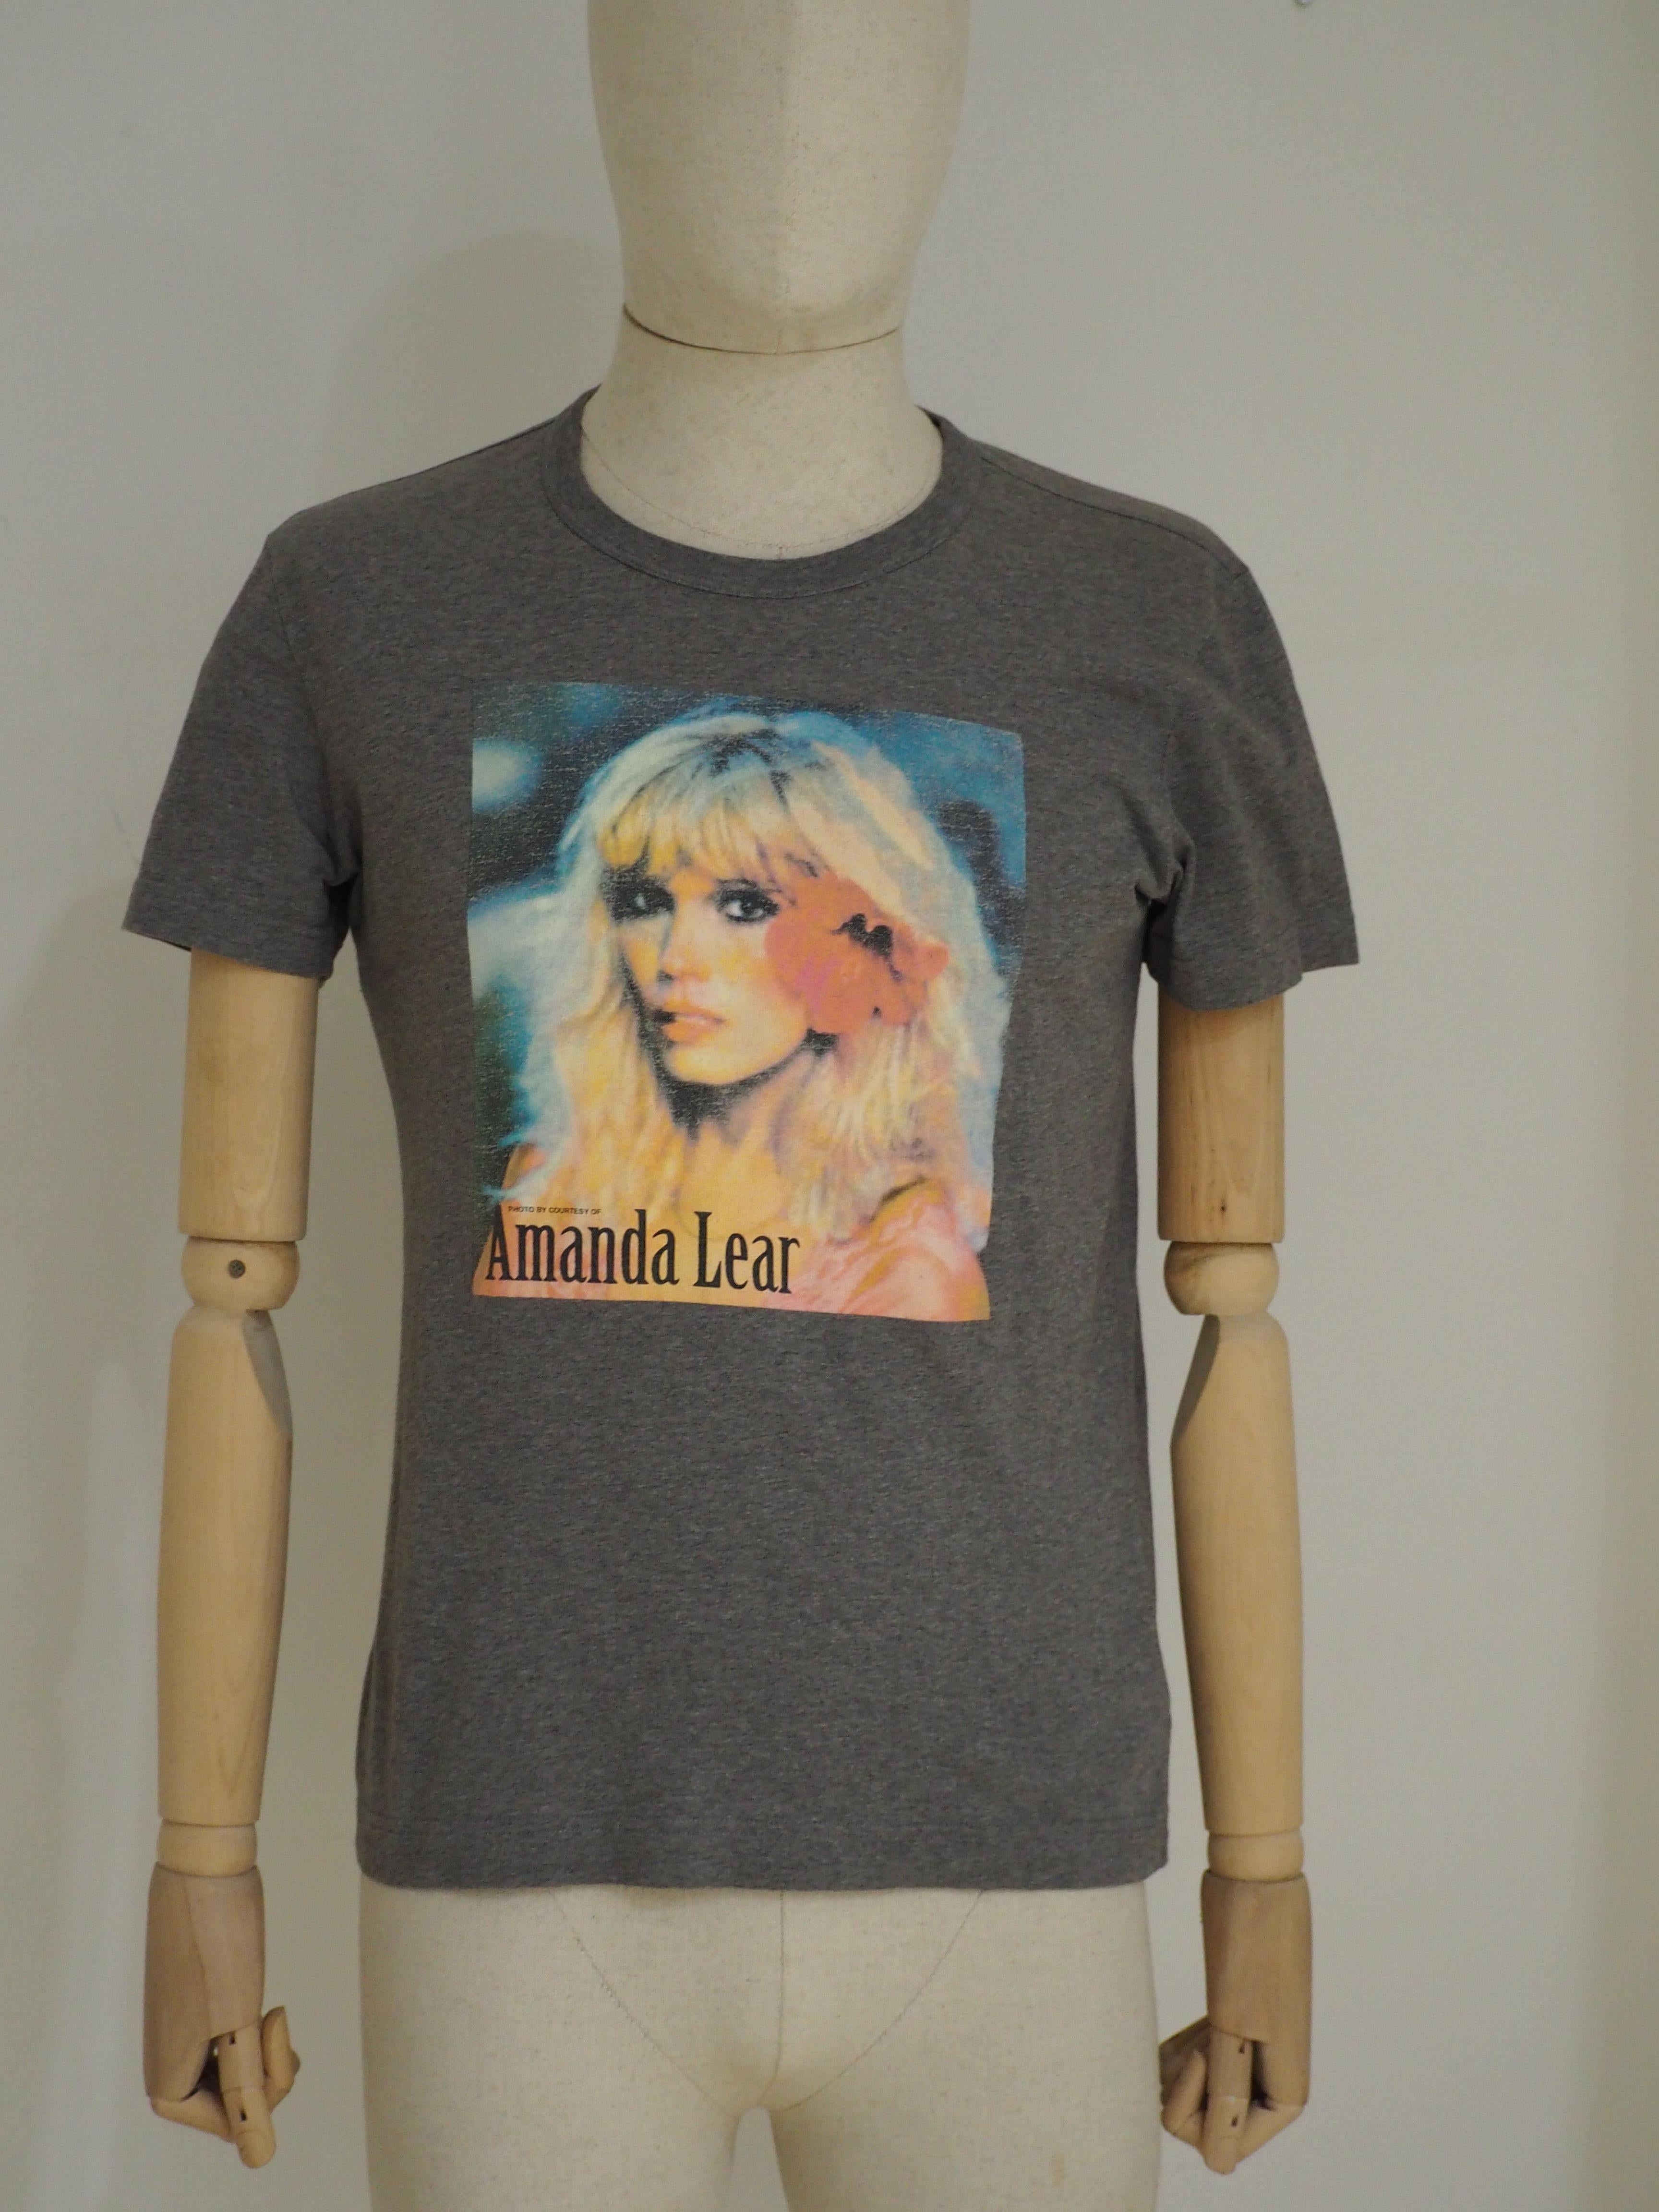 Dolce & Gabbana grey Amanda Lear cotton t-shirt
Totally made in italy in size 48